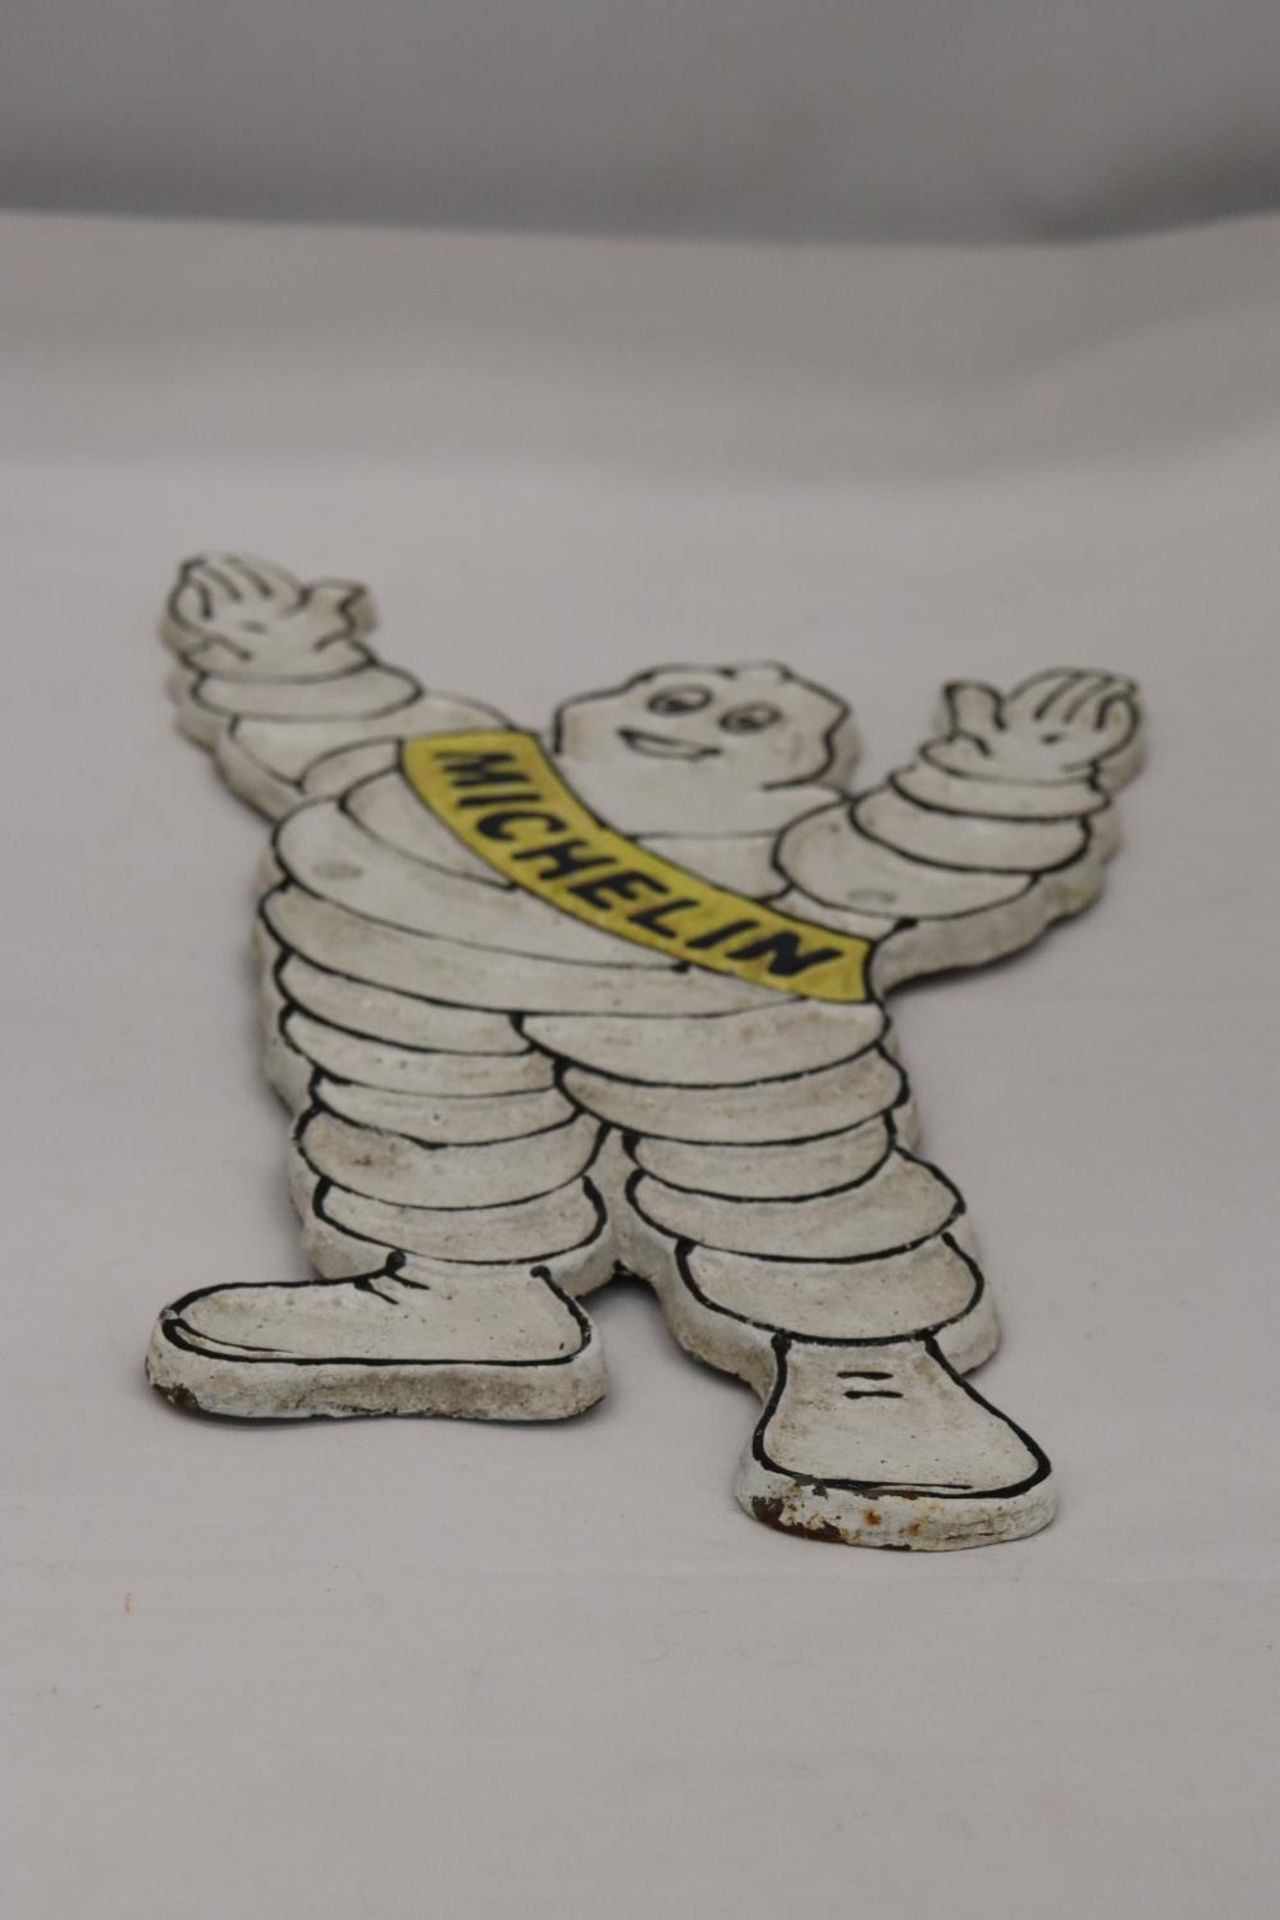 A CAST MICHELIN MAN SIGN, HEIGHT 32CM - Image 2 of 4